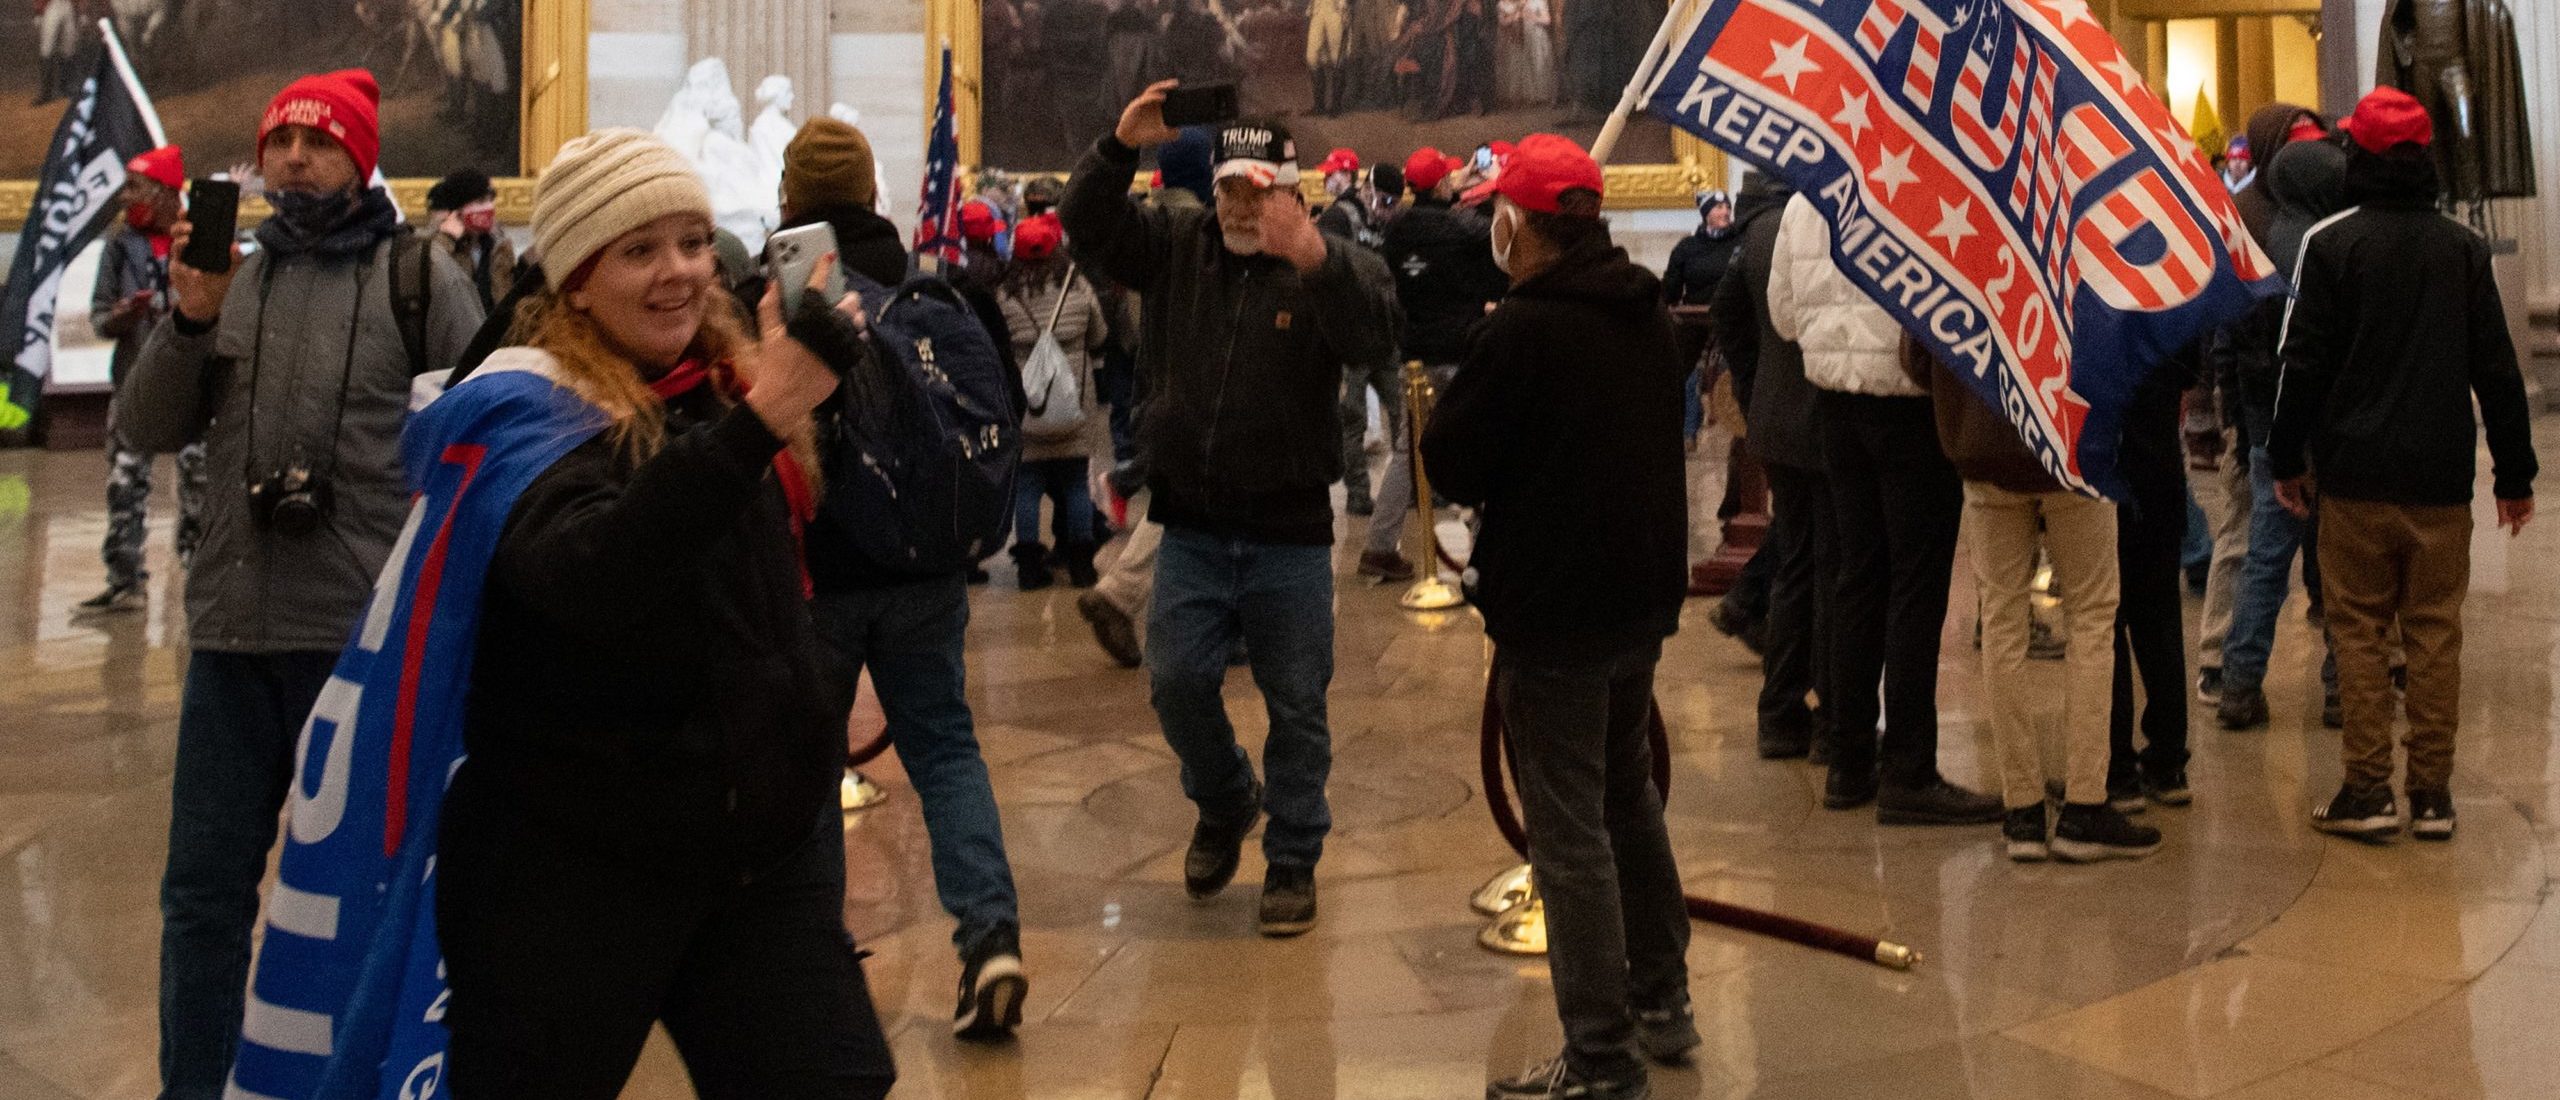 Supporters of US President Donald Trump enter the US Capitol's Rotunda on January 6, 2021, in Washington, DC. - Demonstrators breeched security and entered the Capitol as Congress debated the a 2020 presidential election Electoral Vote Certification. (Photo by SAUL LOEB / AFP) (Photo by SAUL LOEB/AFP via Getty Images)